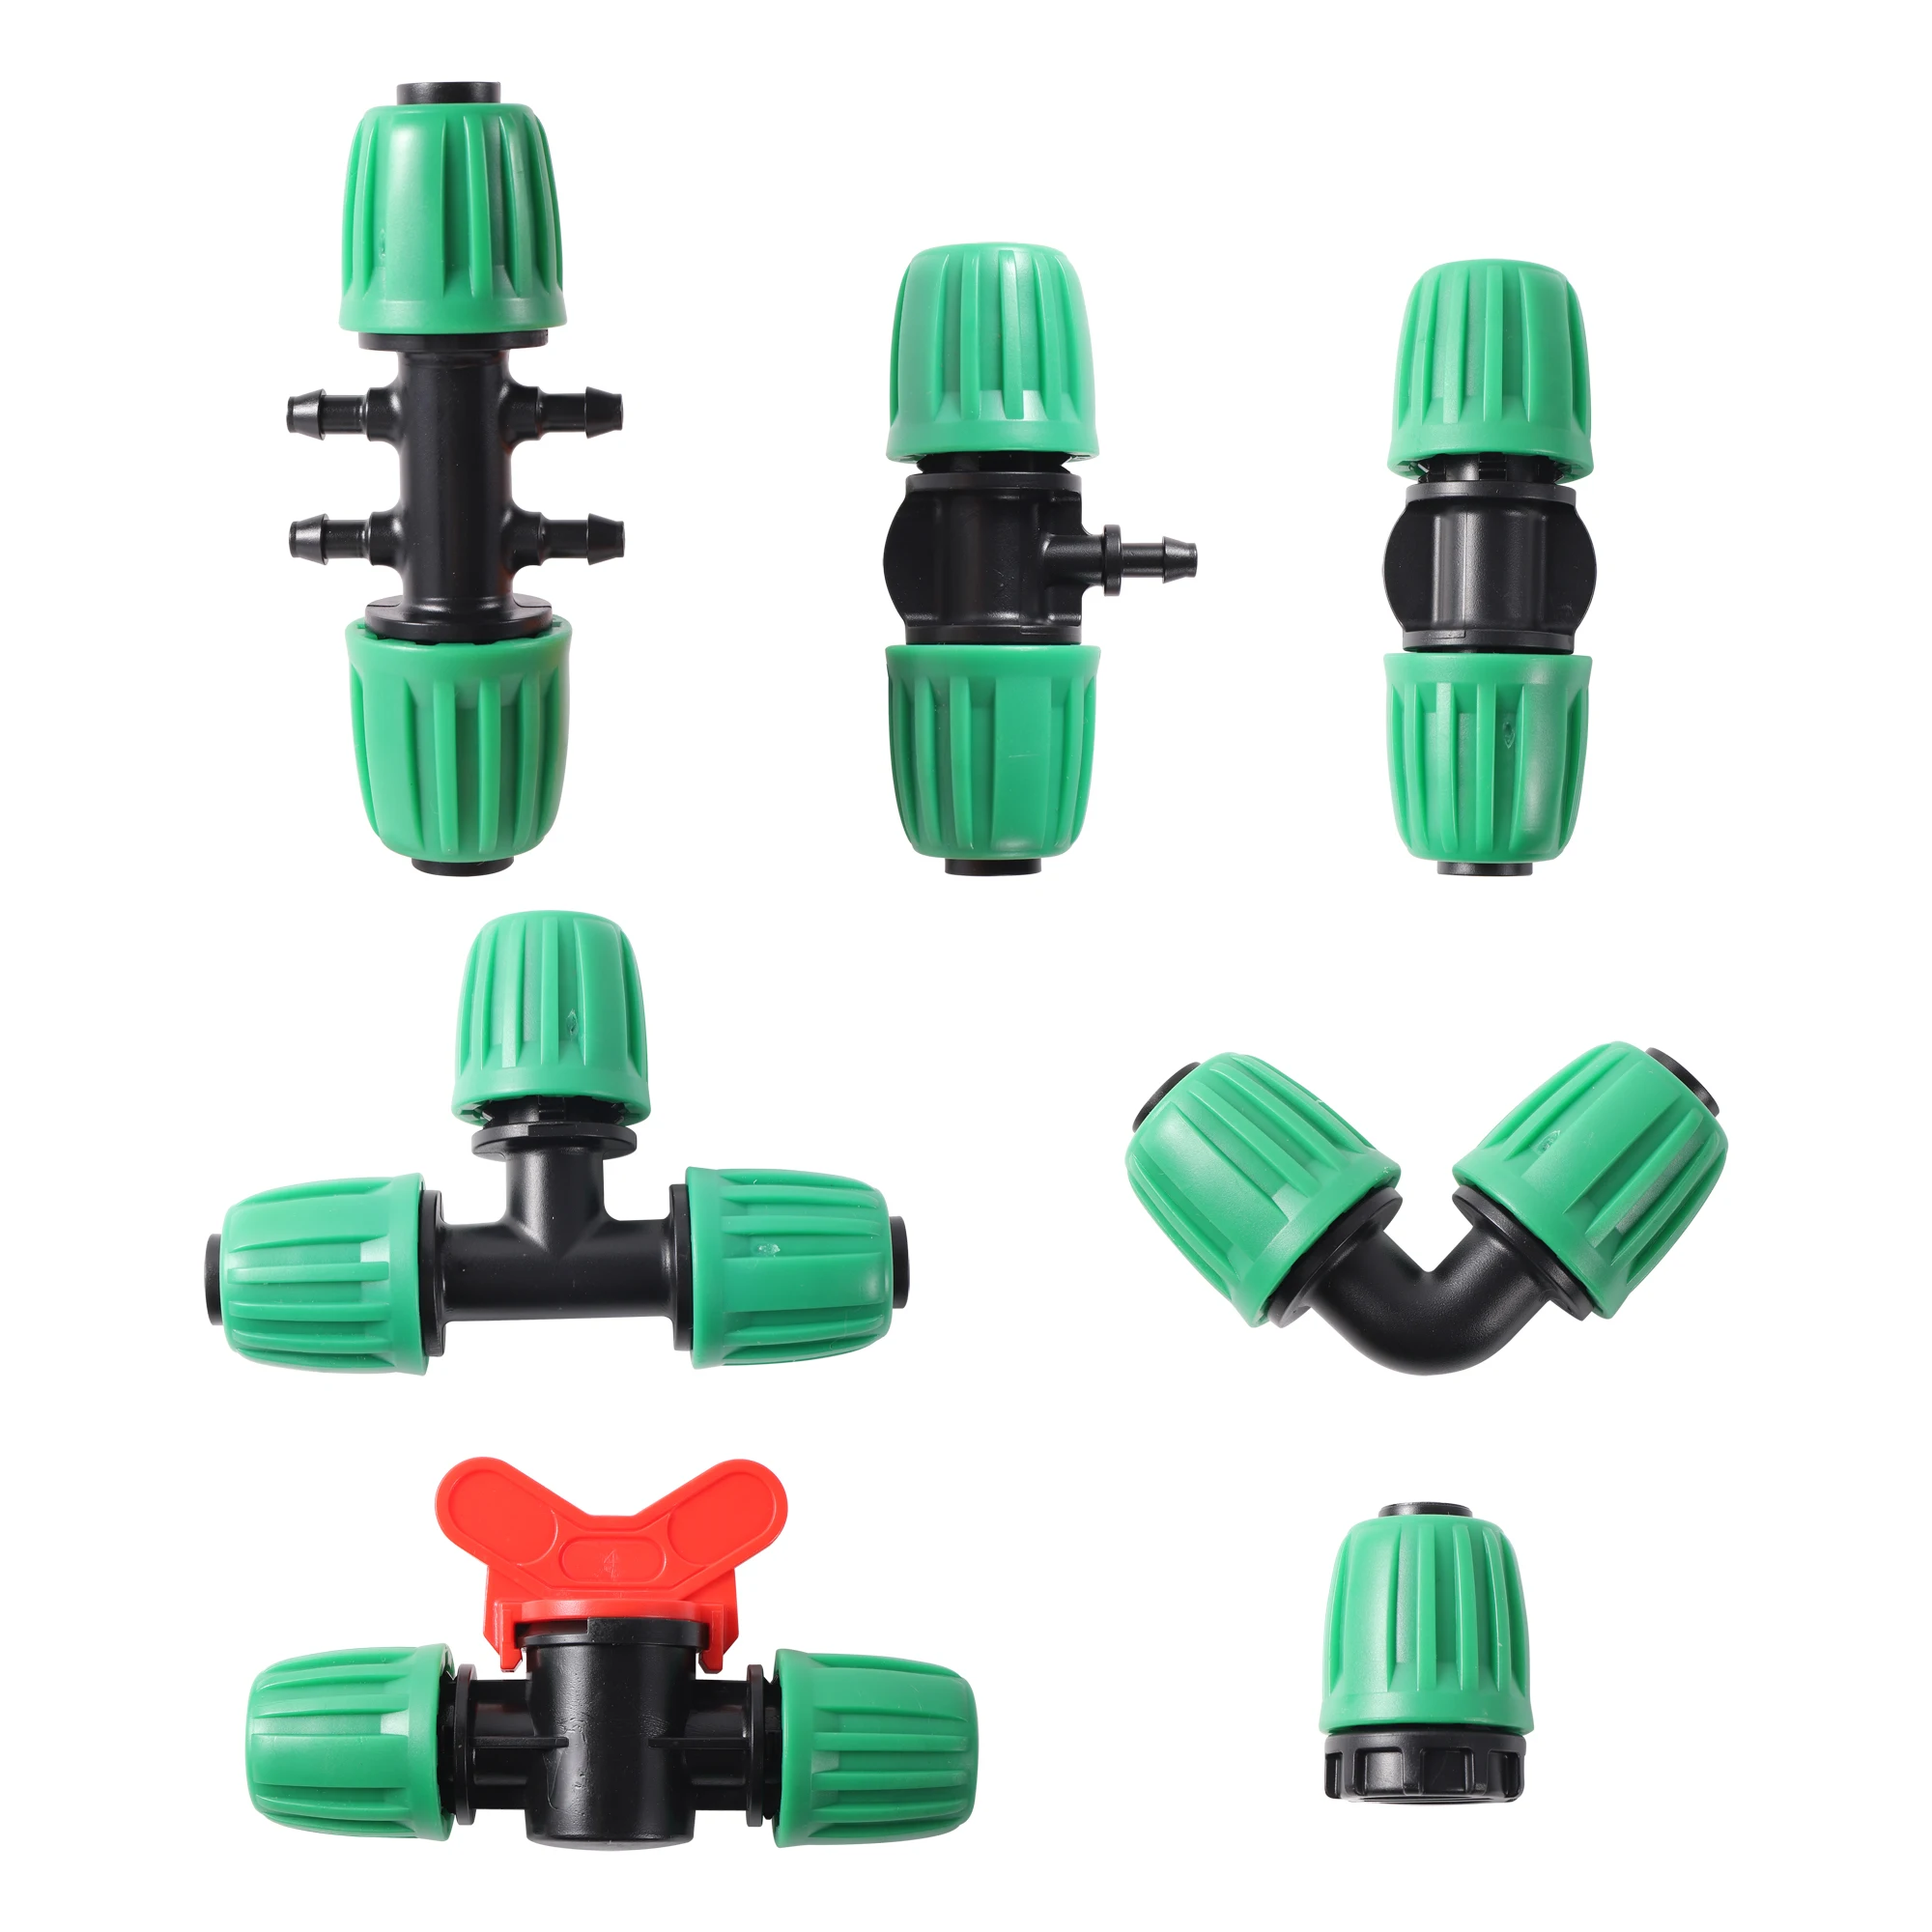 20Pcs Straight Elbow Tee 16mm PE Pipe Locked Connector Valve Garden Agriculture Automatic Watering Micro Irrigation System Joint